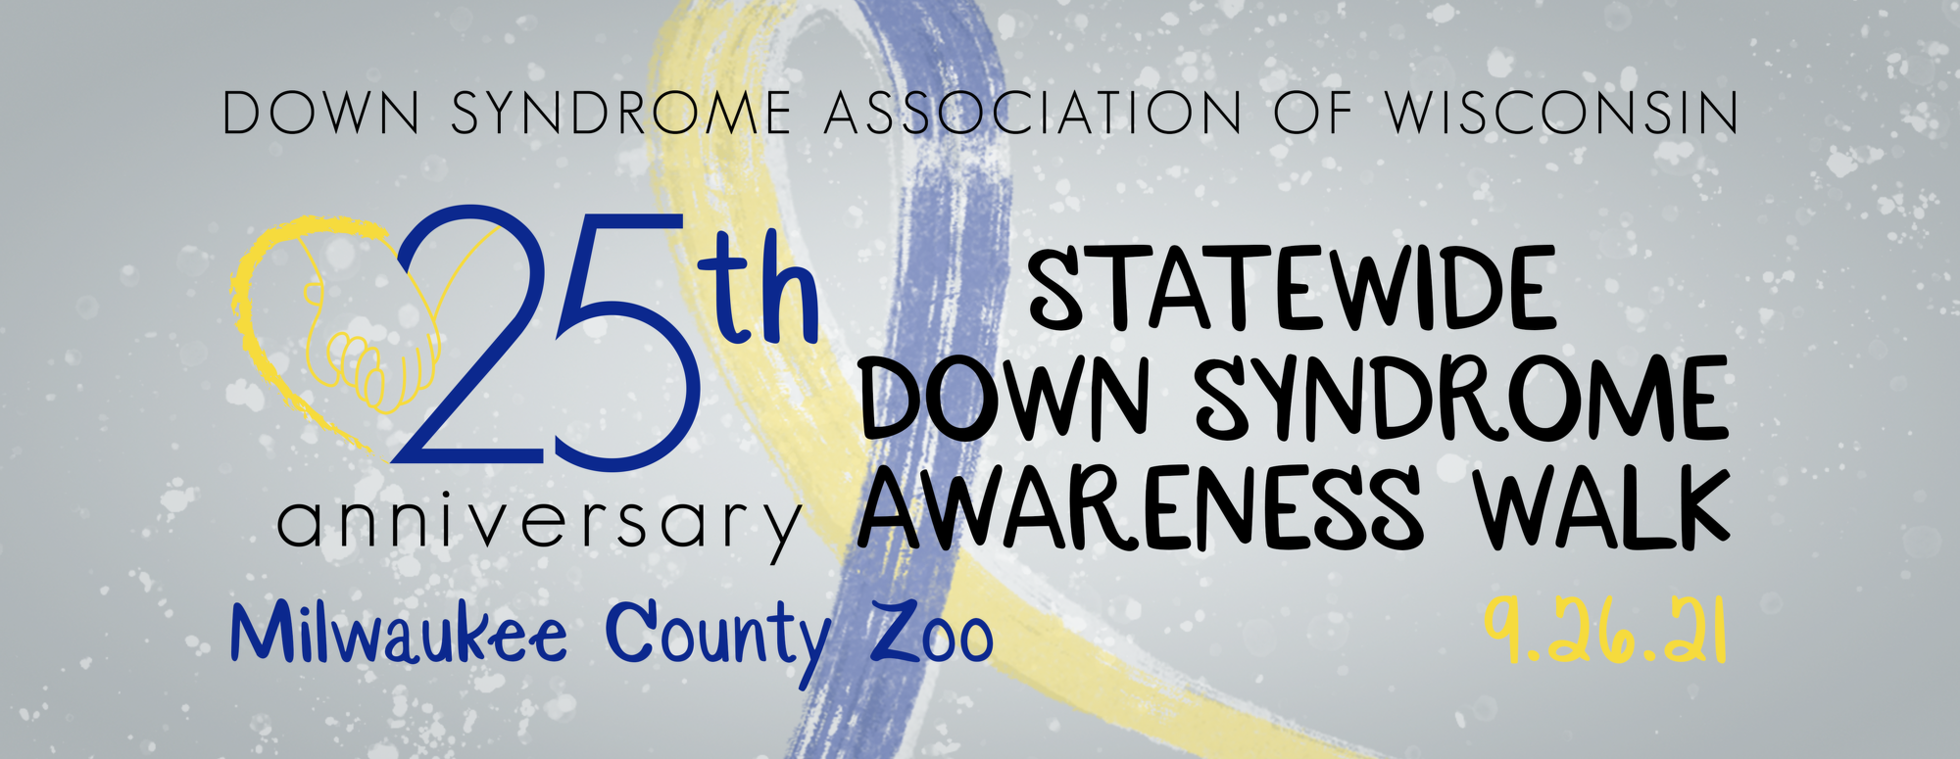 25th Annual Down Syndrome Awareness Walk